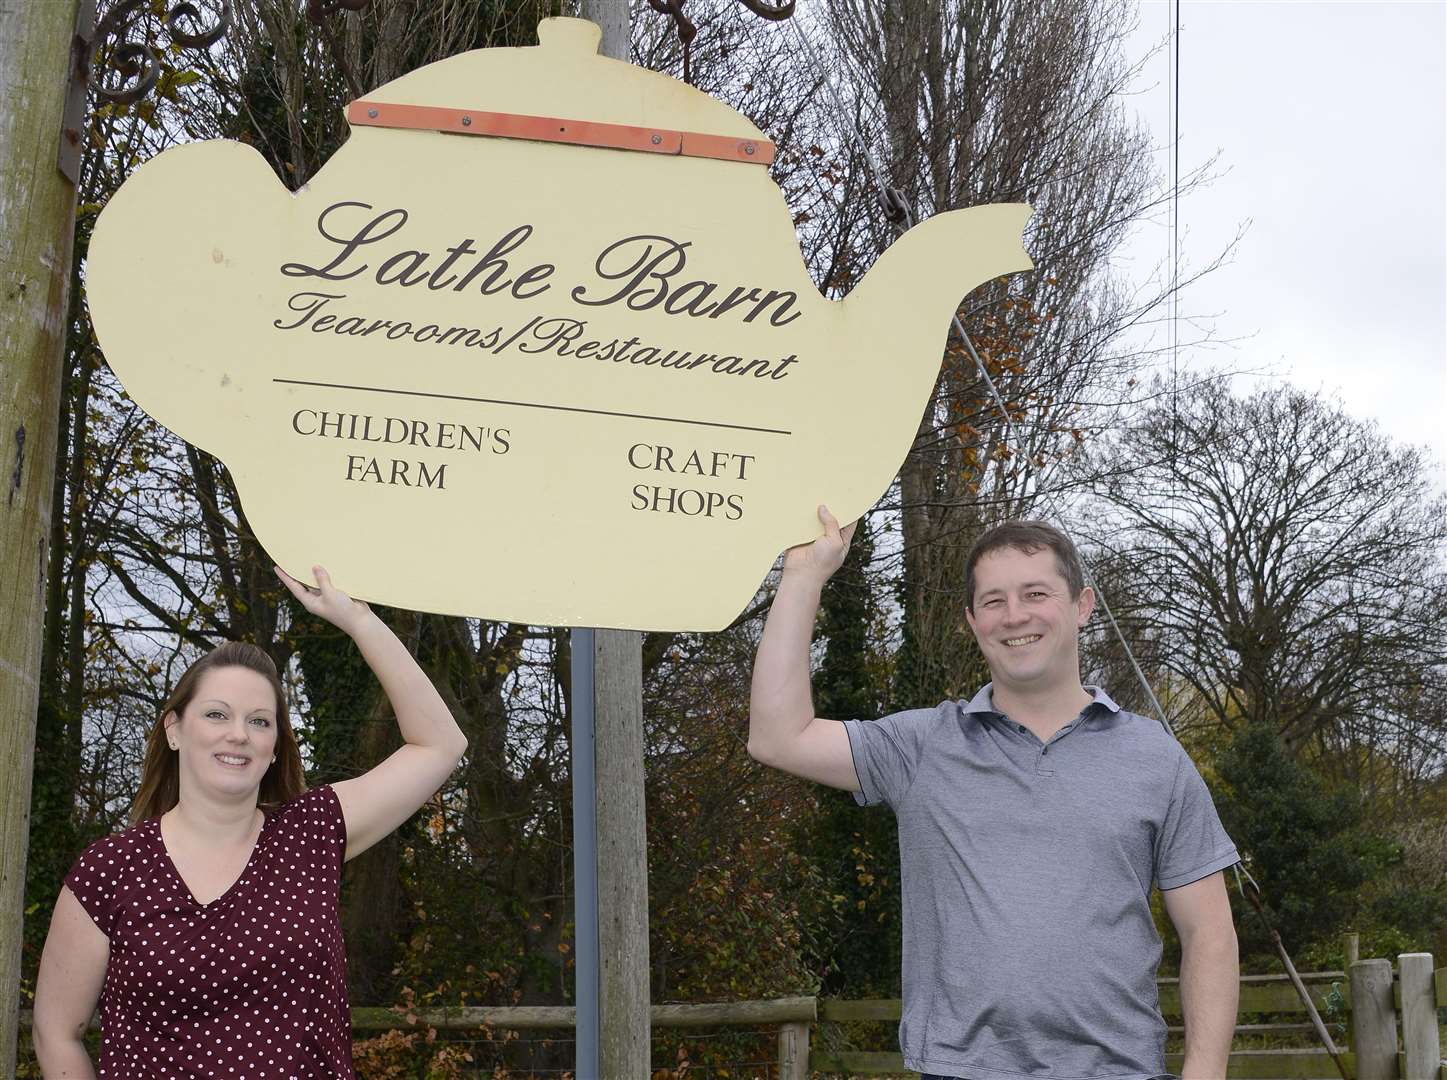 Lathe Barn was taken over by Katy and James Beck last autumn but the business has been hit by cash flow problems